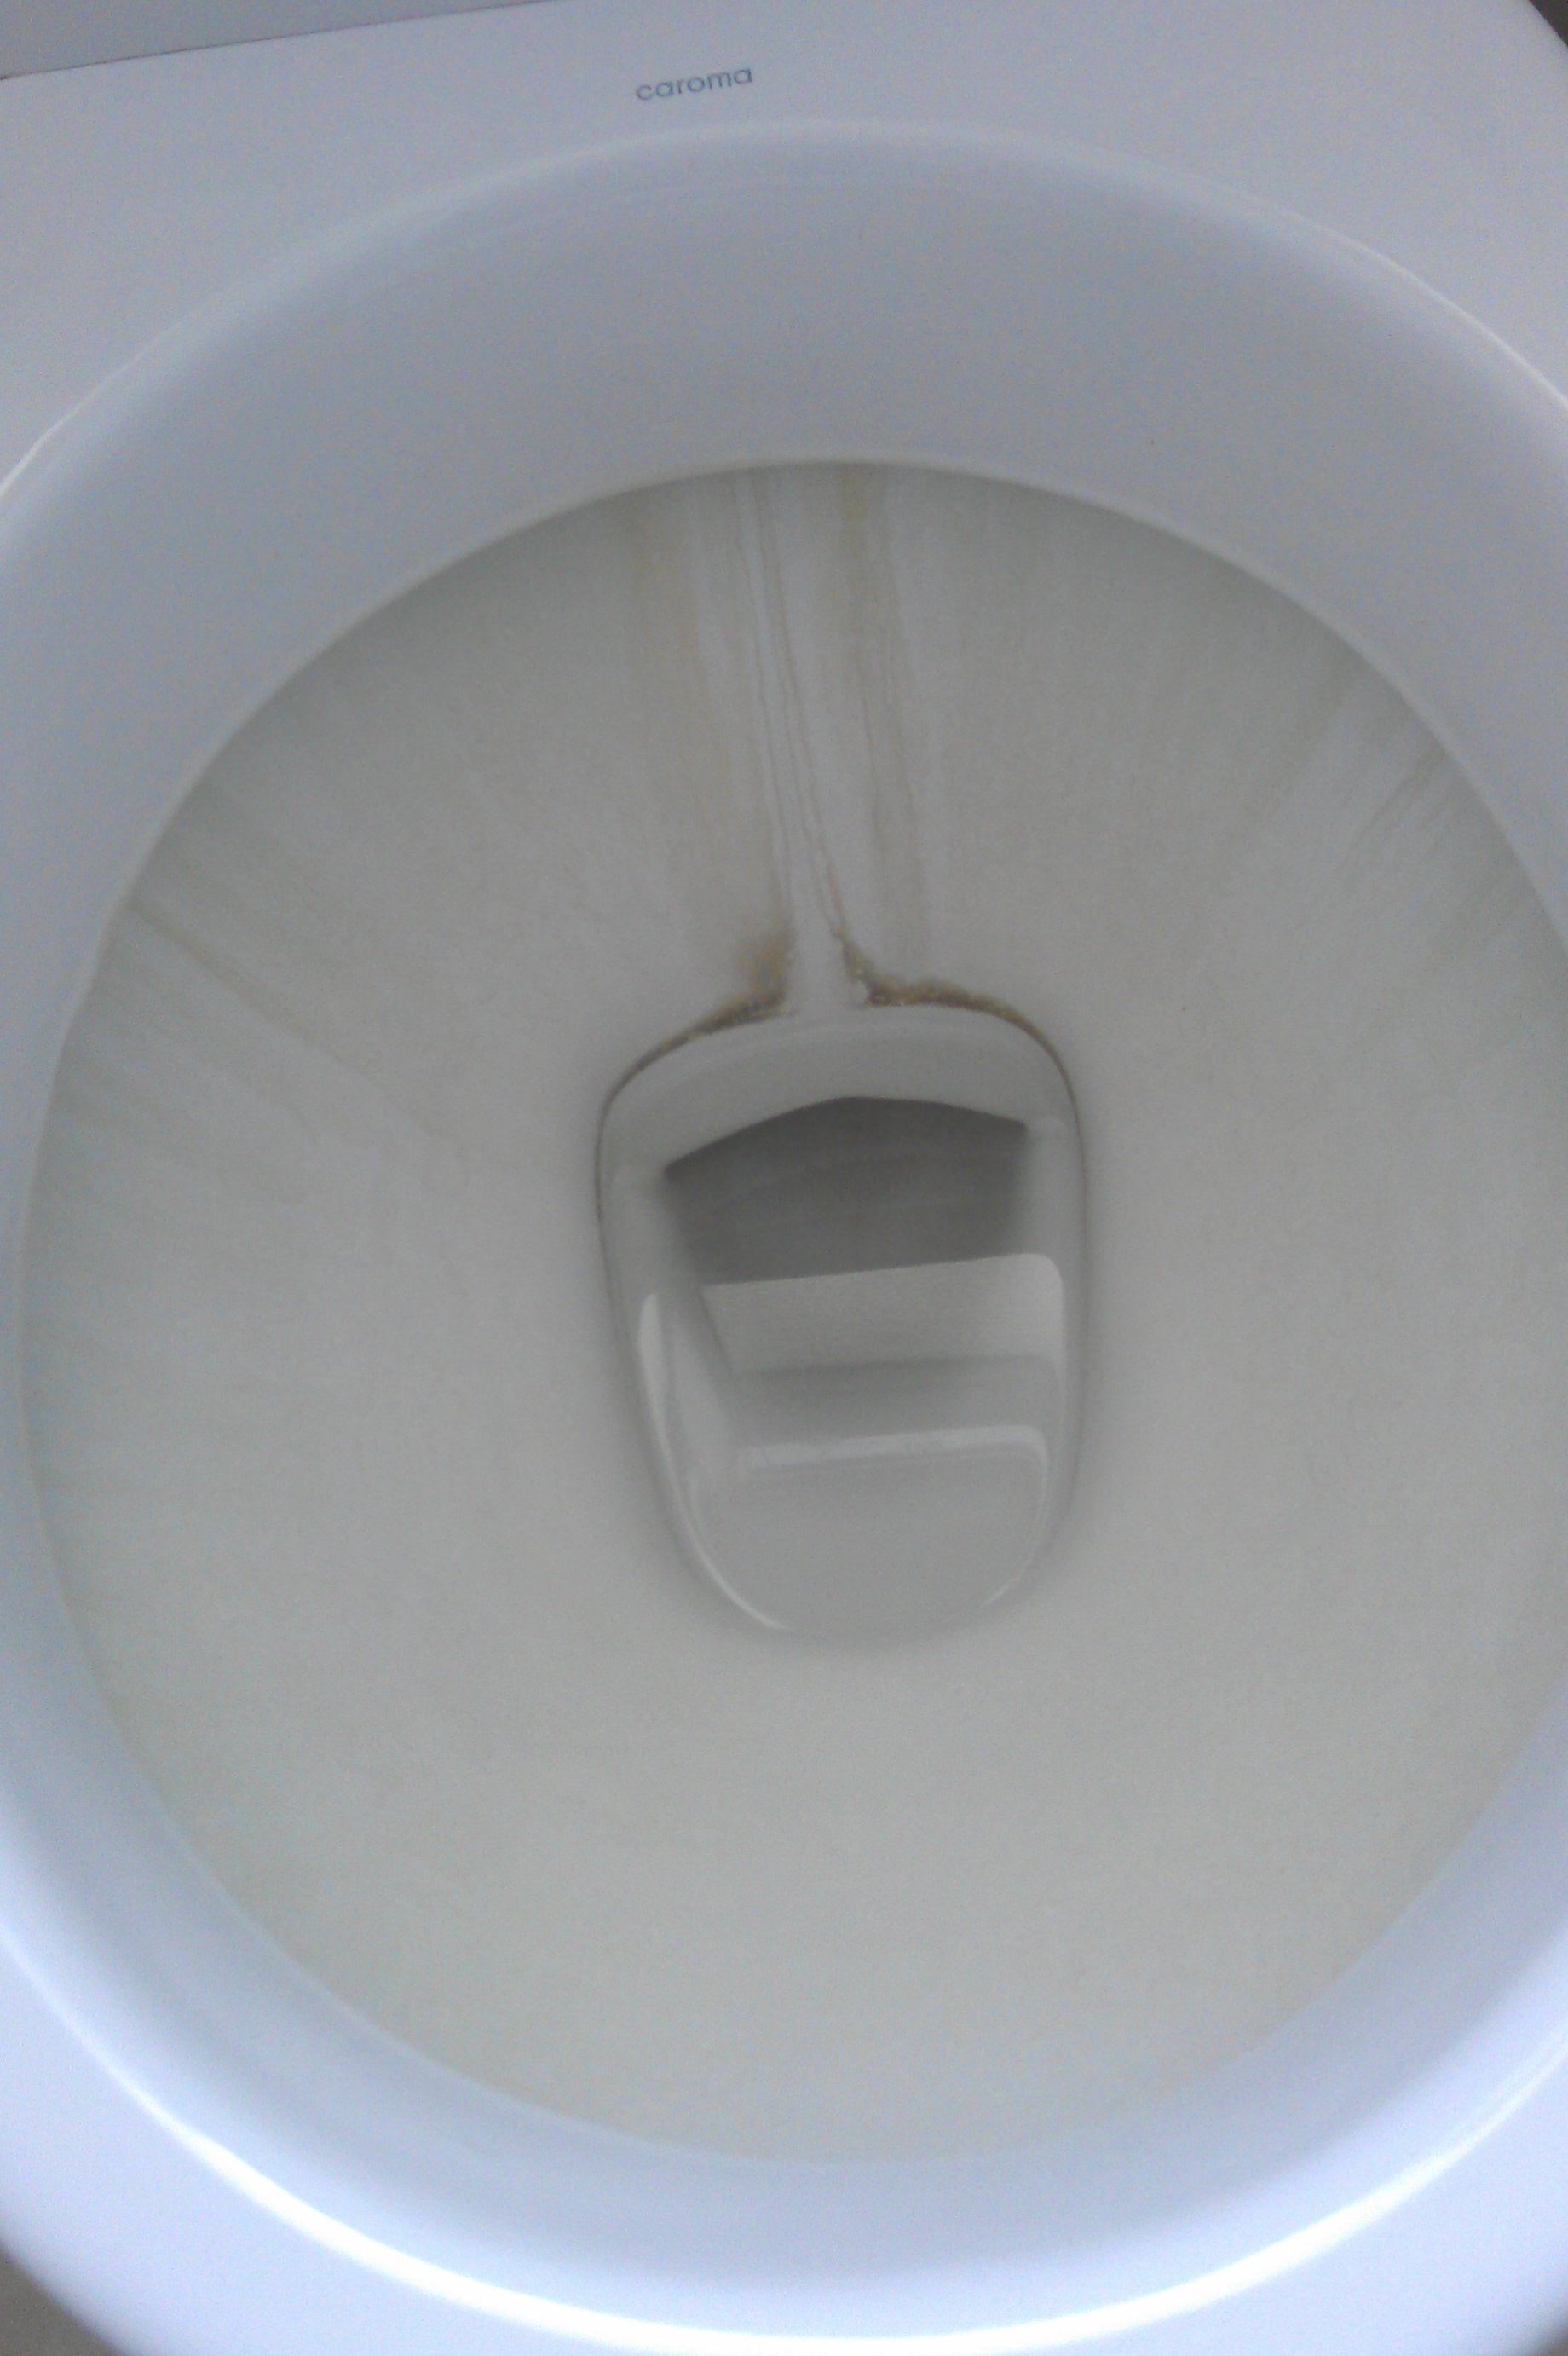 Cleaning stubborn water stains from a toilet  Rhonda Bracey: At